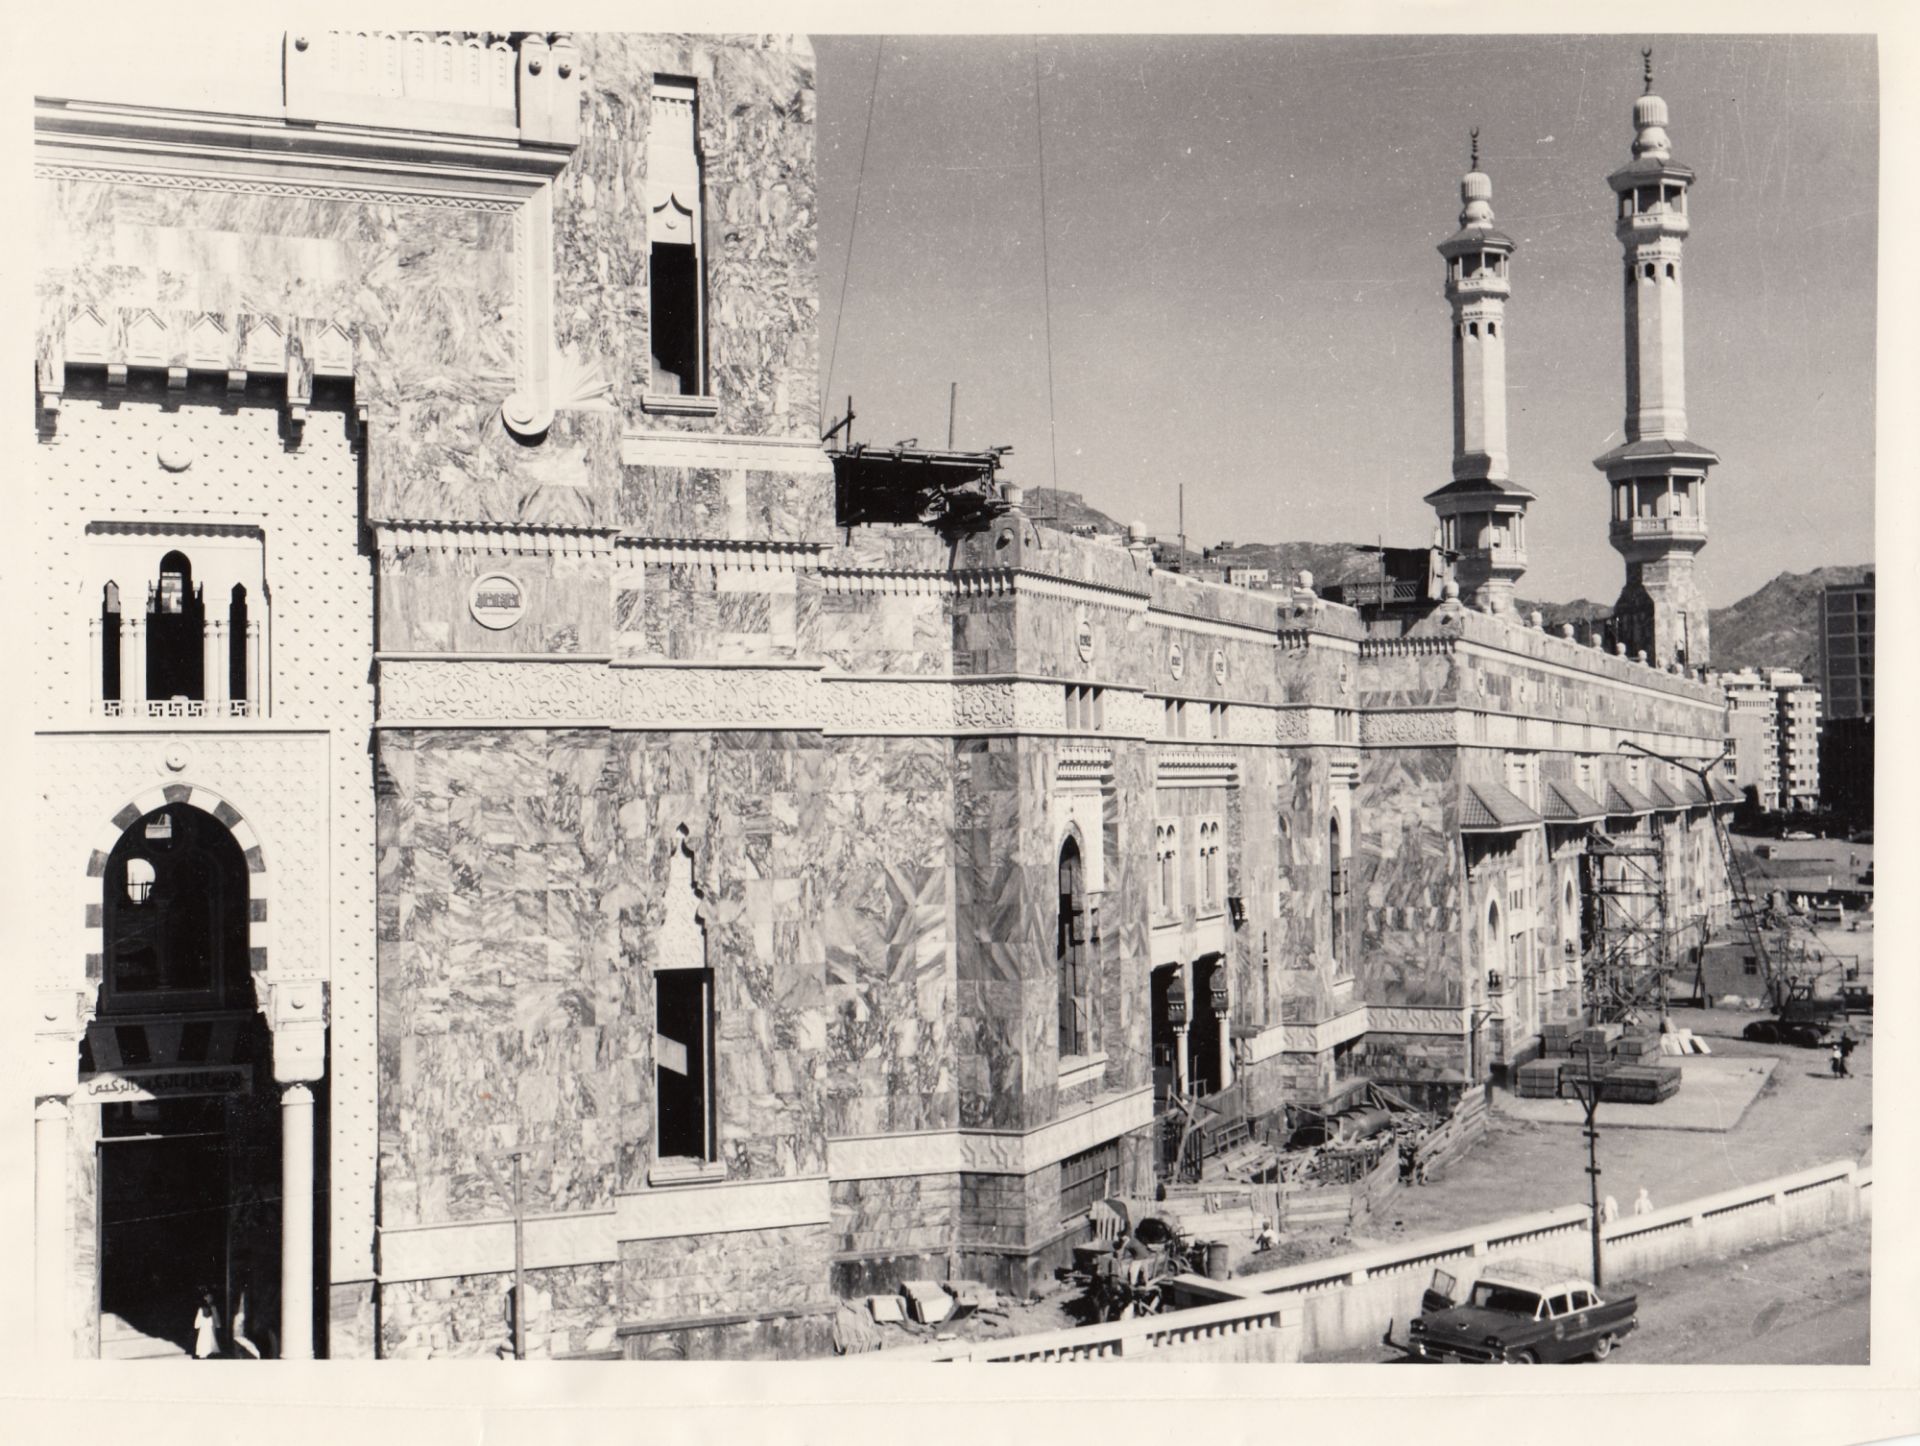 FOURTEEN RARE PHOTOGRAPHS OF THE FIRST EXPANSION OF THE MASJID AL-HARAM DURING KING SAUD BIN ABDULAZ - Image 6 of 16